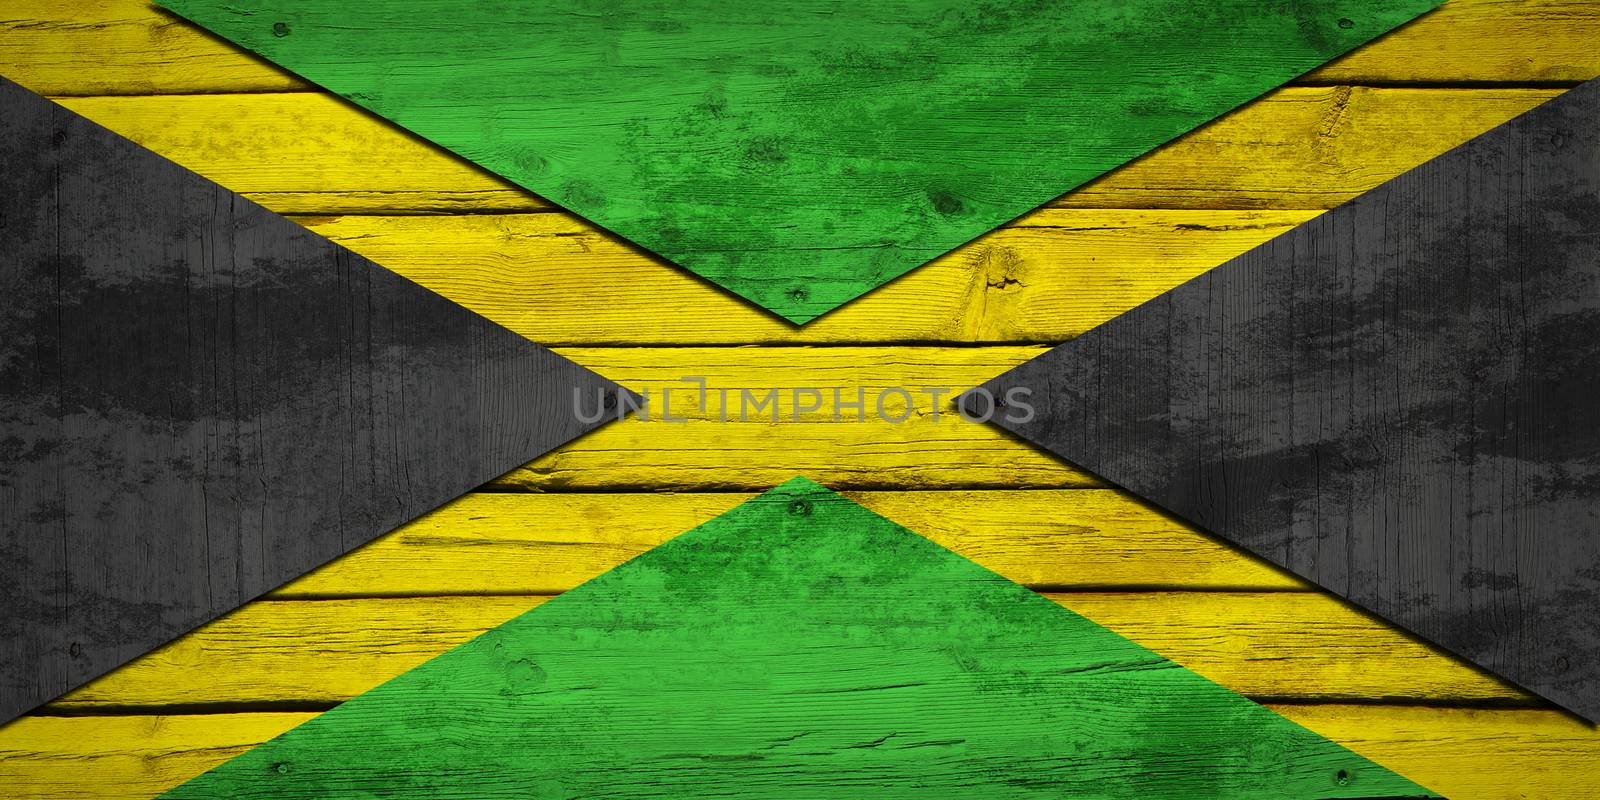 Jamaican flag painted on wooden boards. Grunge style